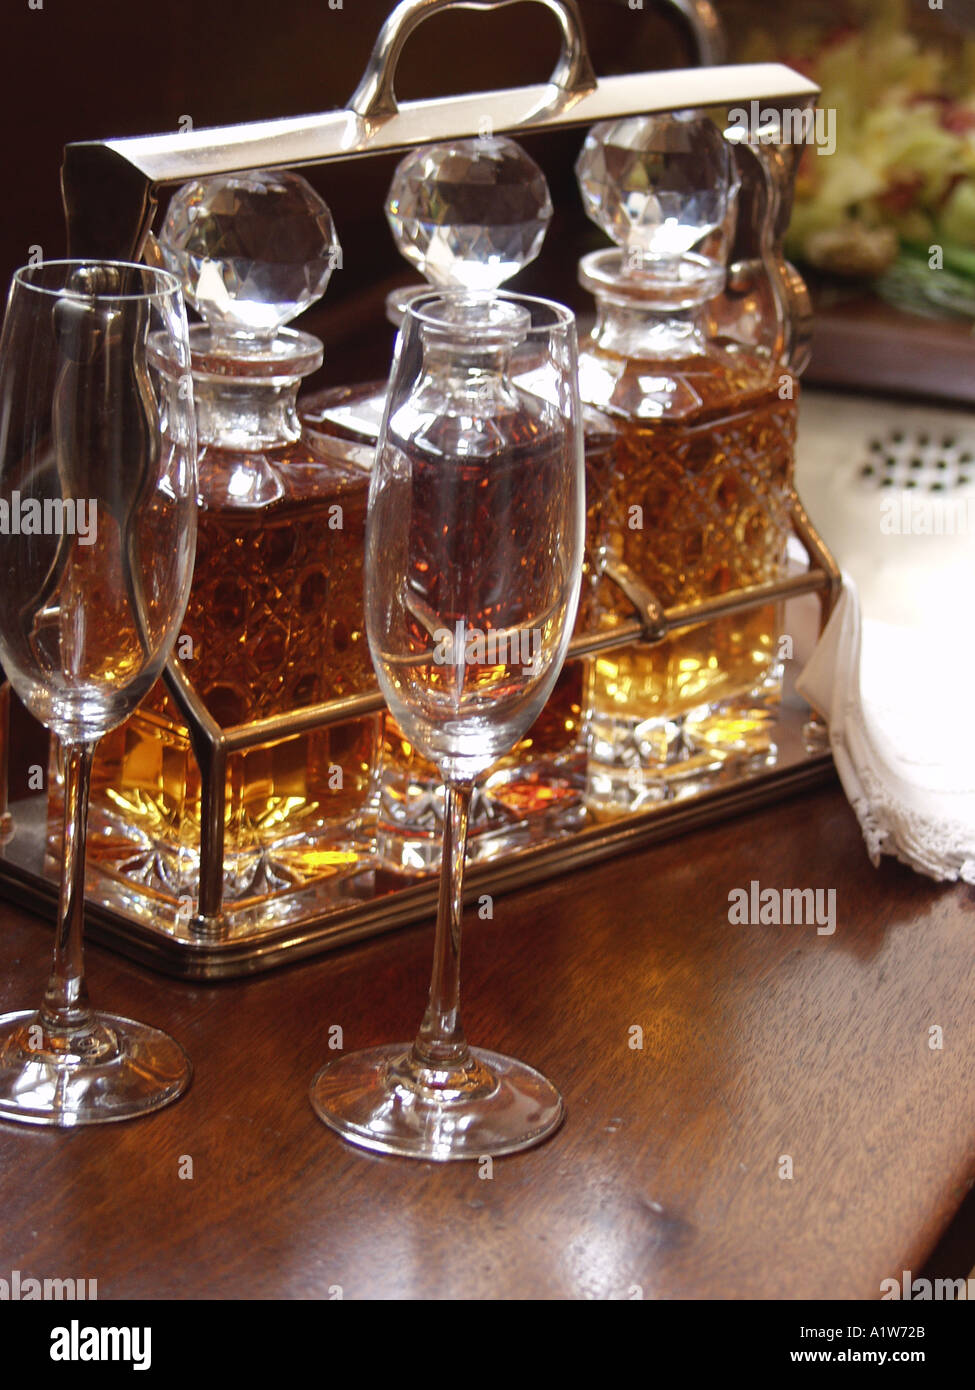 Liquor decanters crystal decanters with liquor sitting on wood counter top Stock Photo